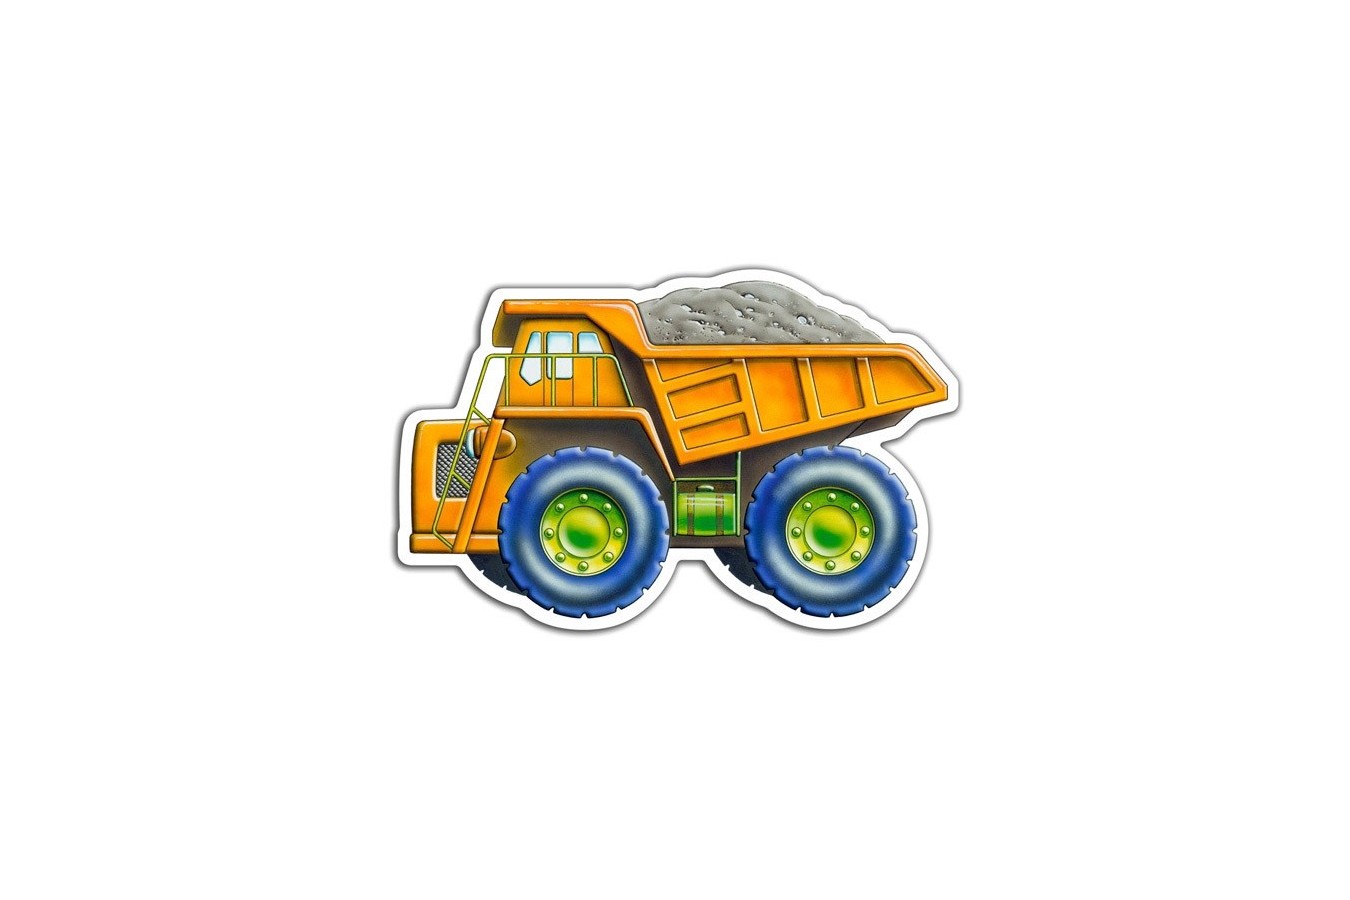 Puzzle Castorland 4 in 1 - Vehicles, 4/5/6/7 Piese